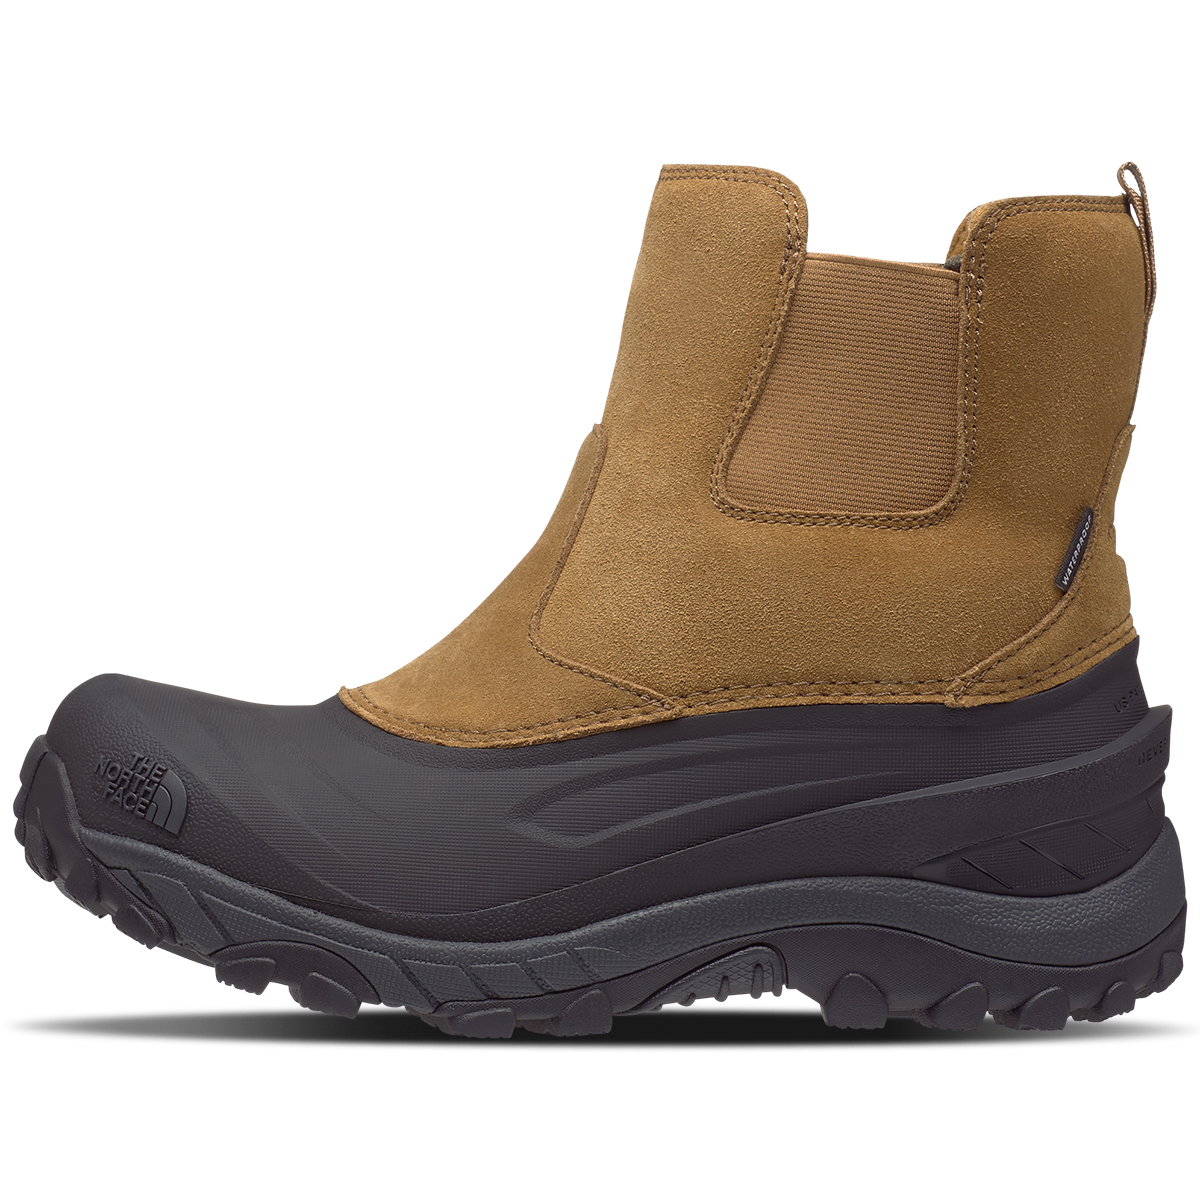 The North Face Men's Chilkat 4 Pull-On Boots